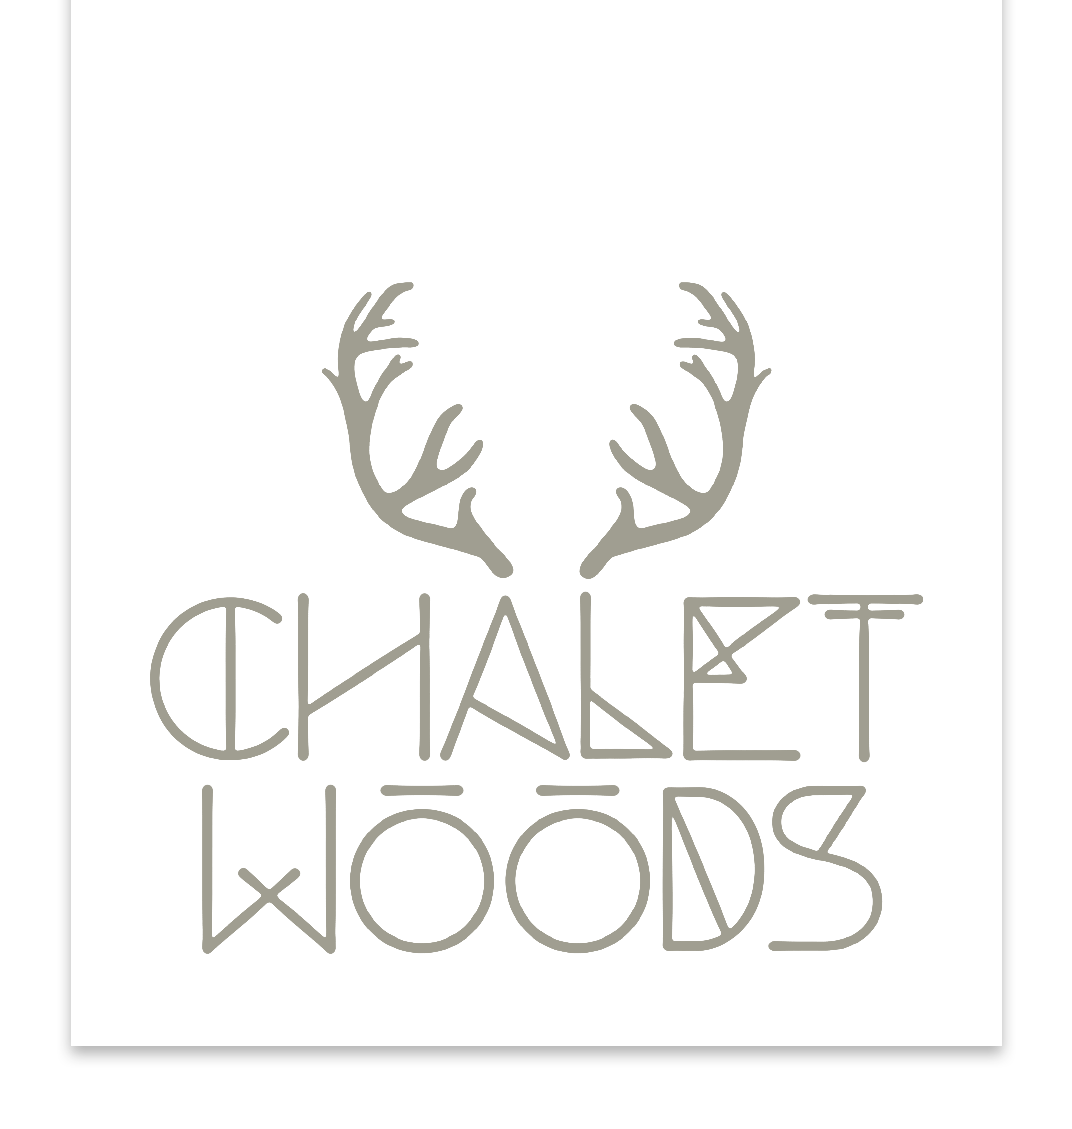 Chalet Woods